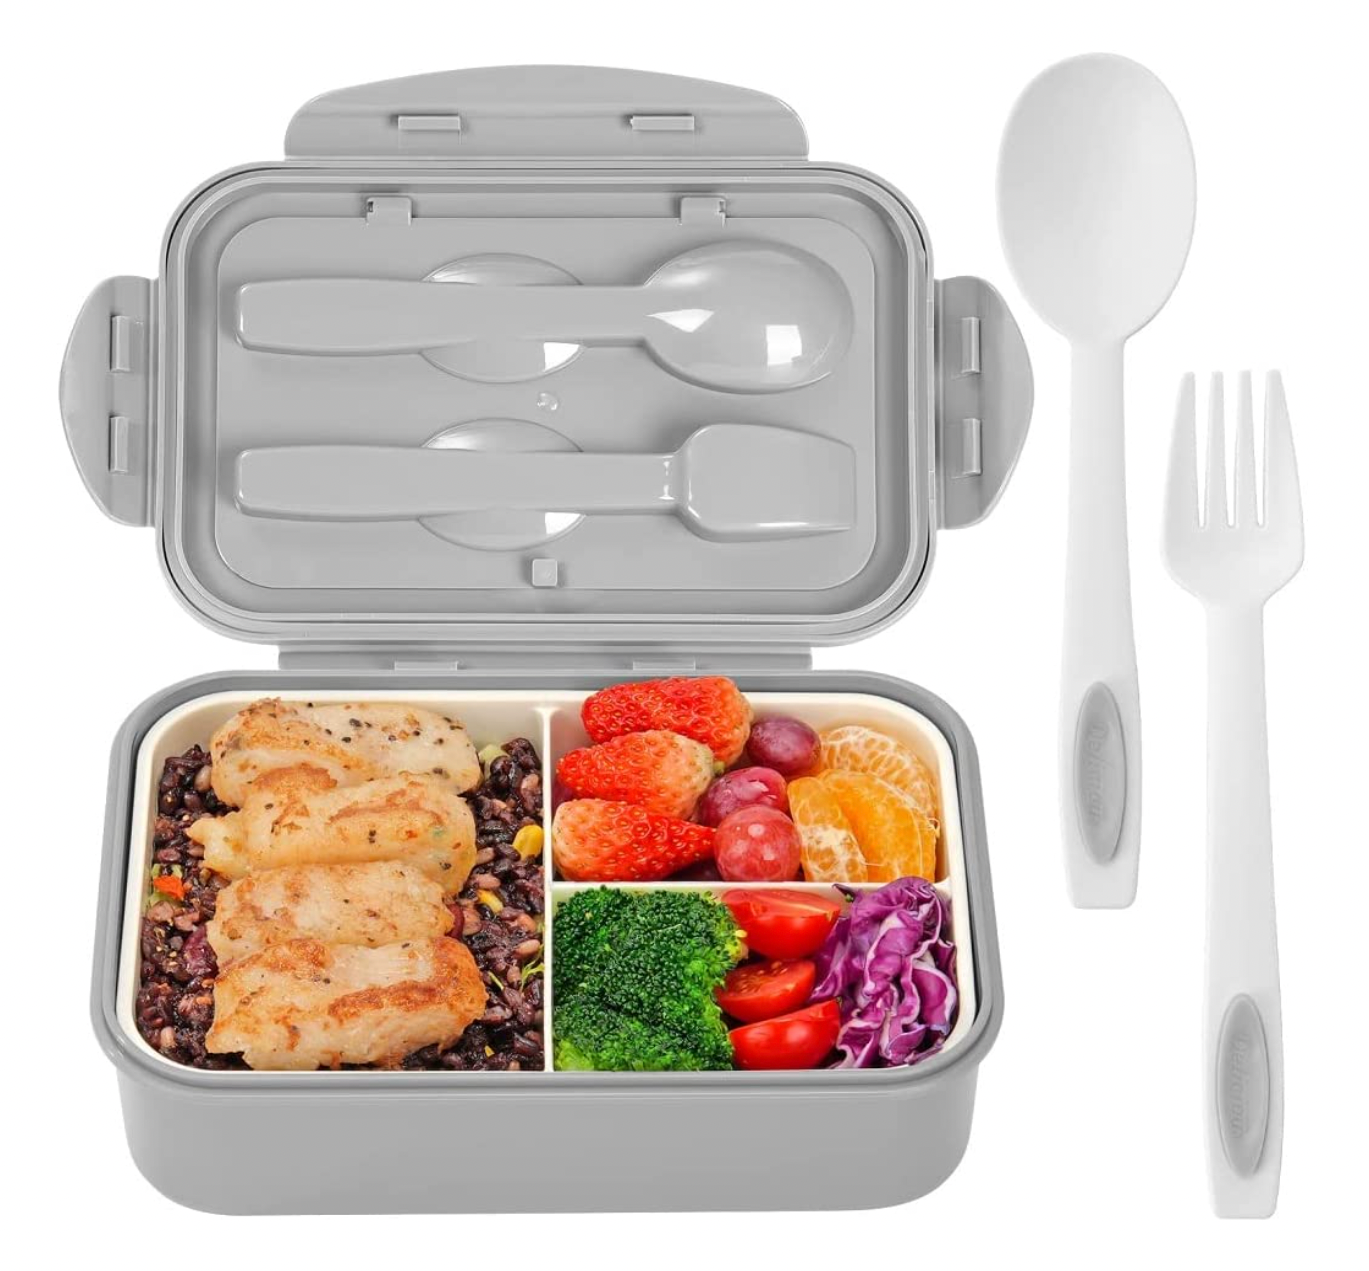 Keweis Bento Box Adult Lunch Box Set, Portable Insulated Lunch Containers  with Thermal Bag, Stackable Stainless Steel Leakproof Food Container for